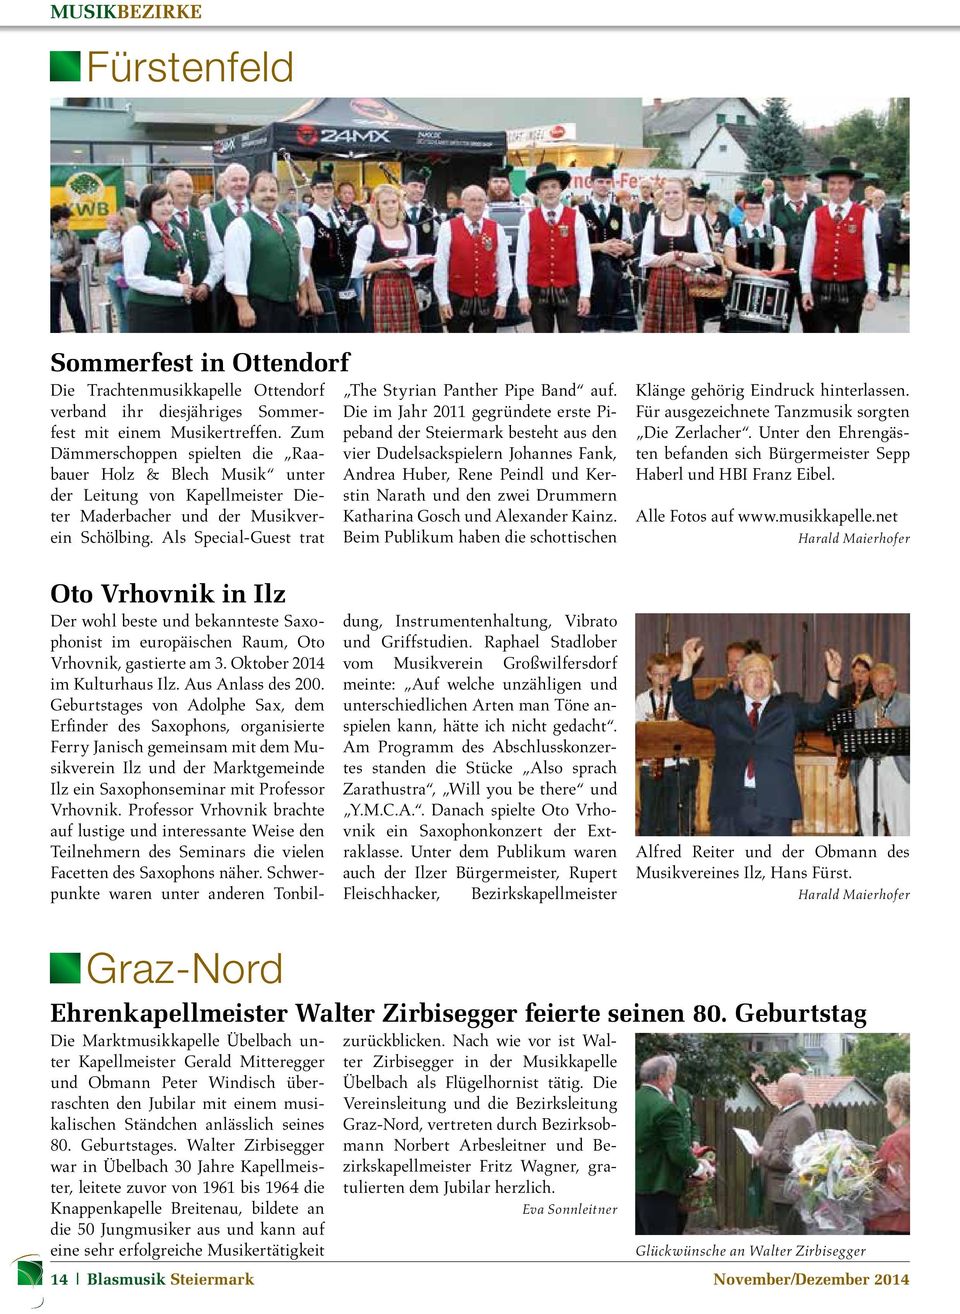 Als Special-Guest trat The Styrian Panther Pipe Band auf.